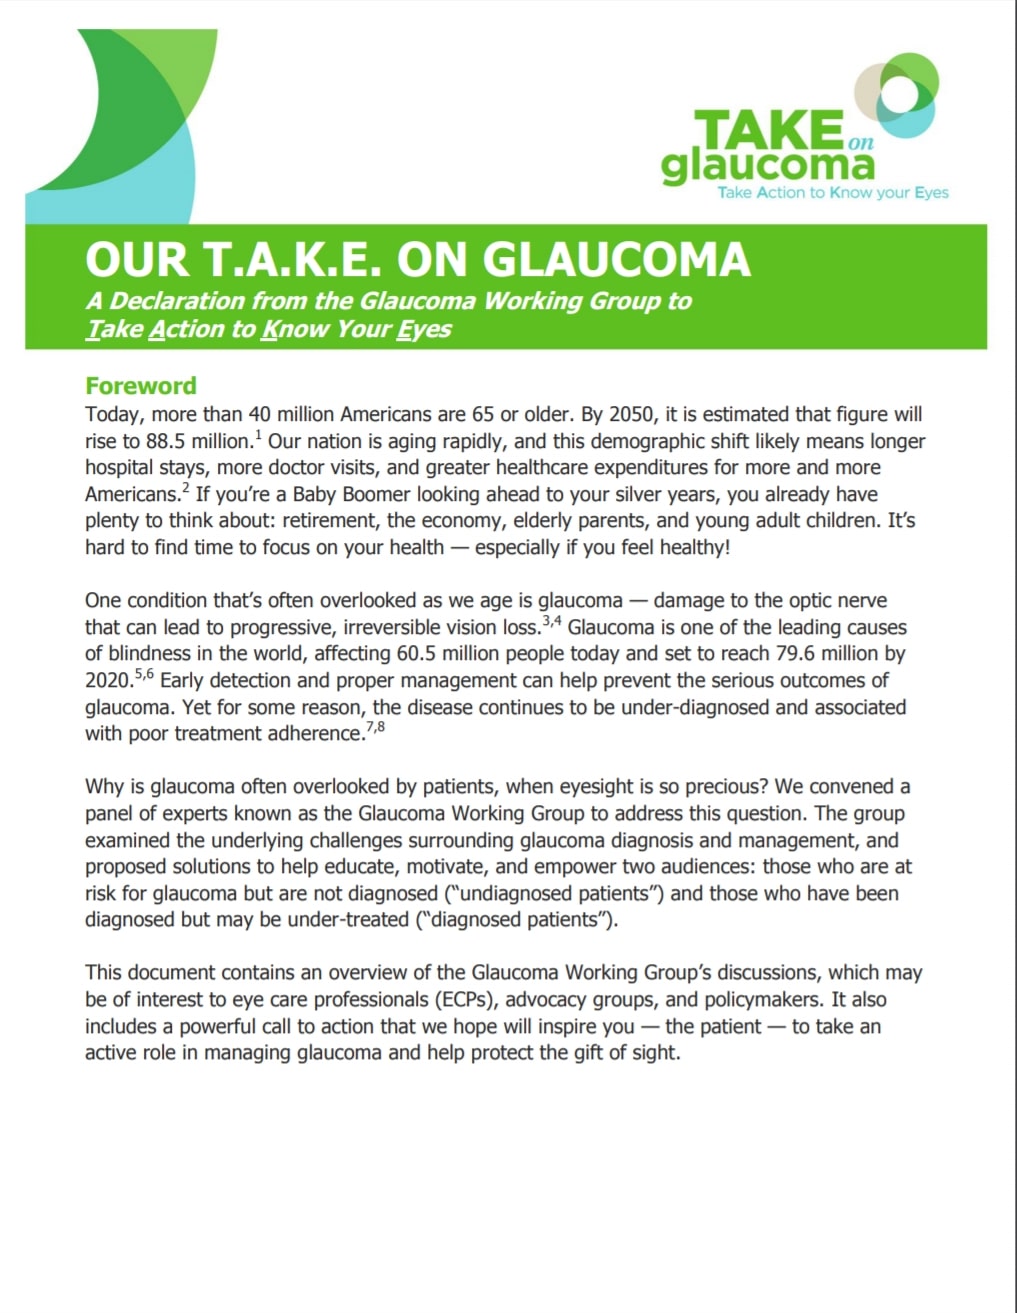 Article on glaucoma.